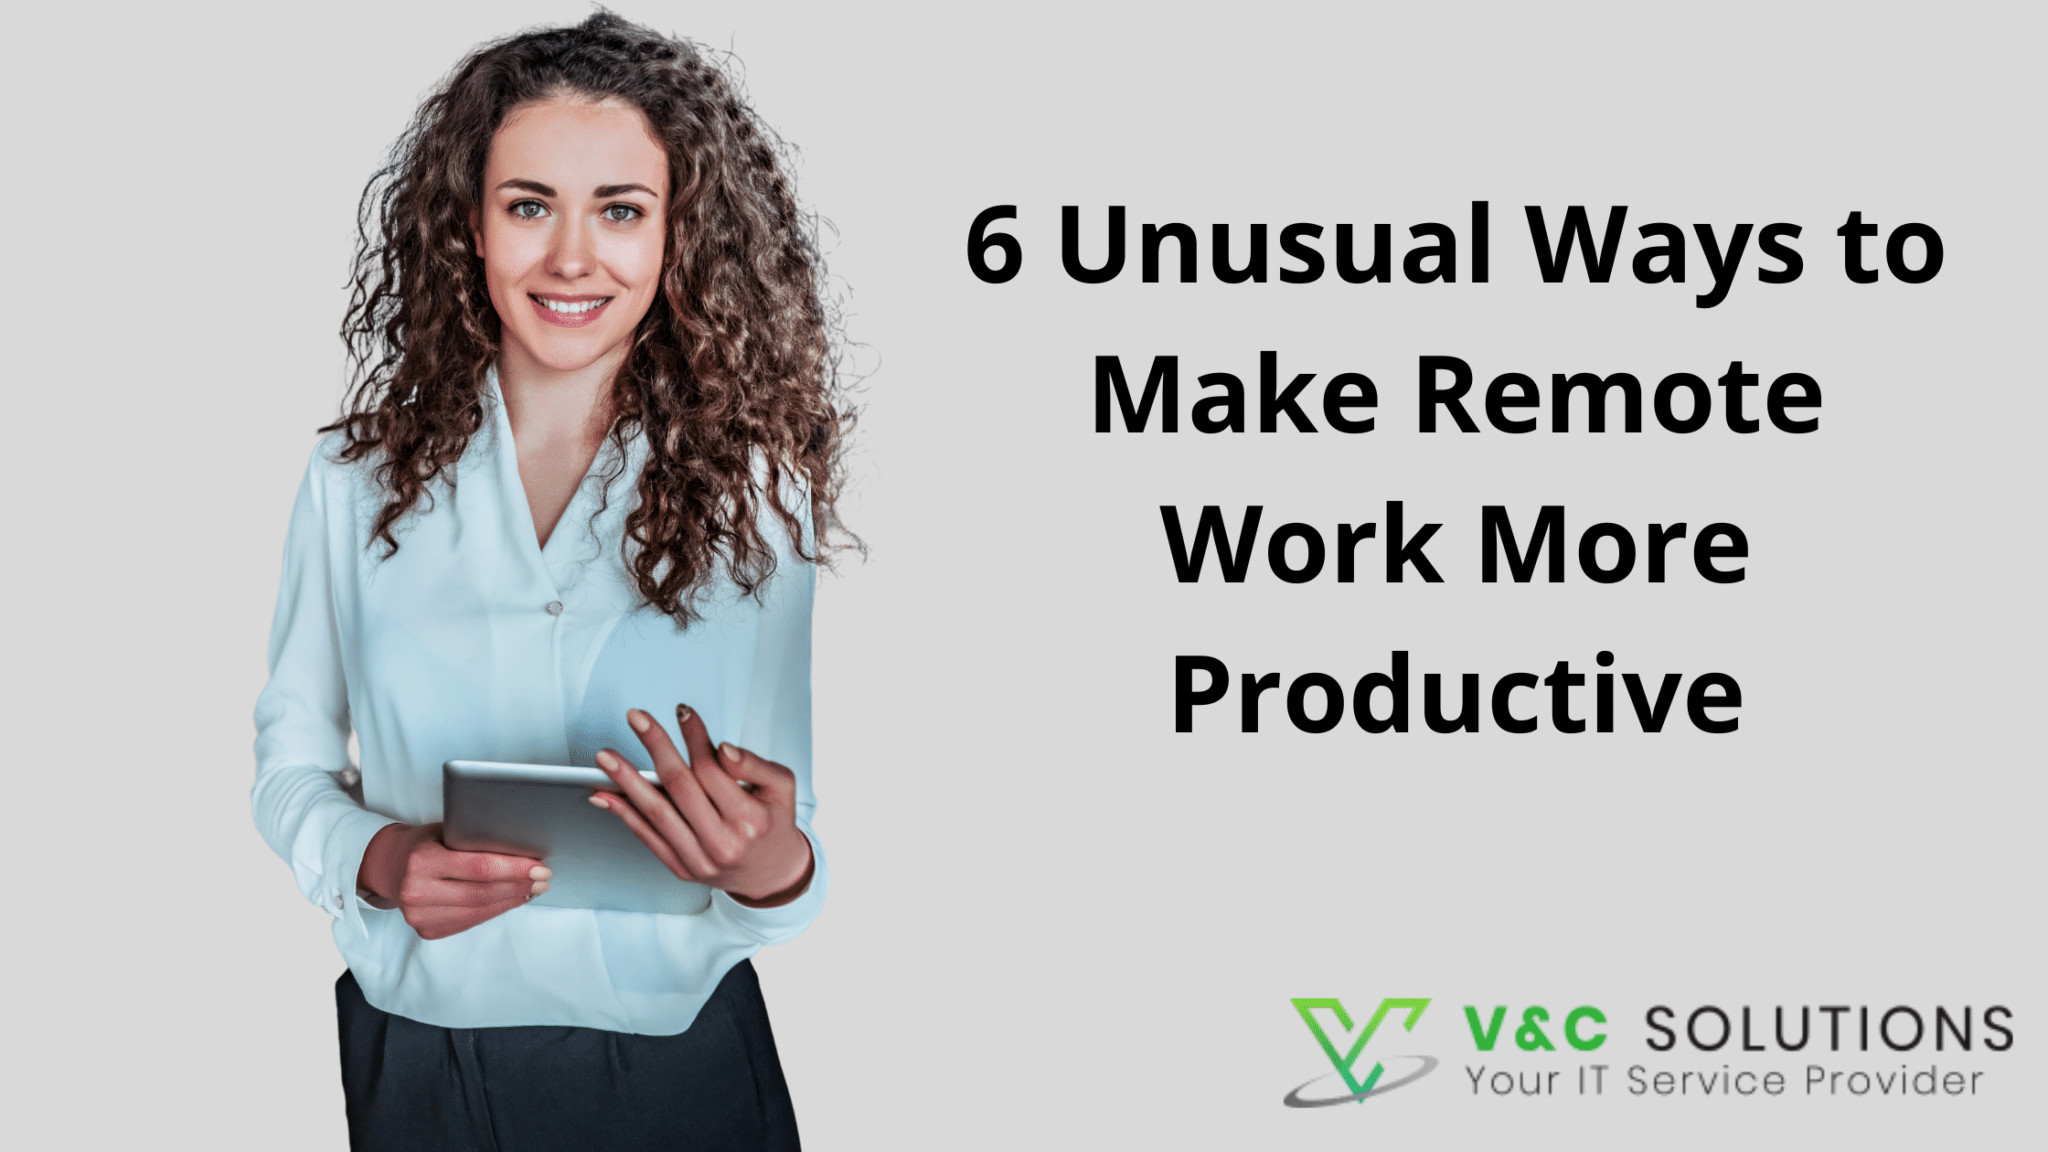 6 Unusual Ways to Make Remote Work More Productive